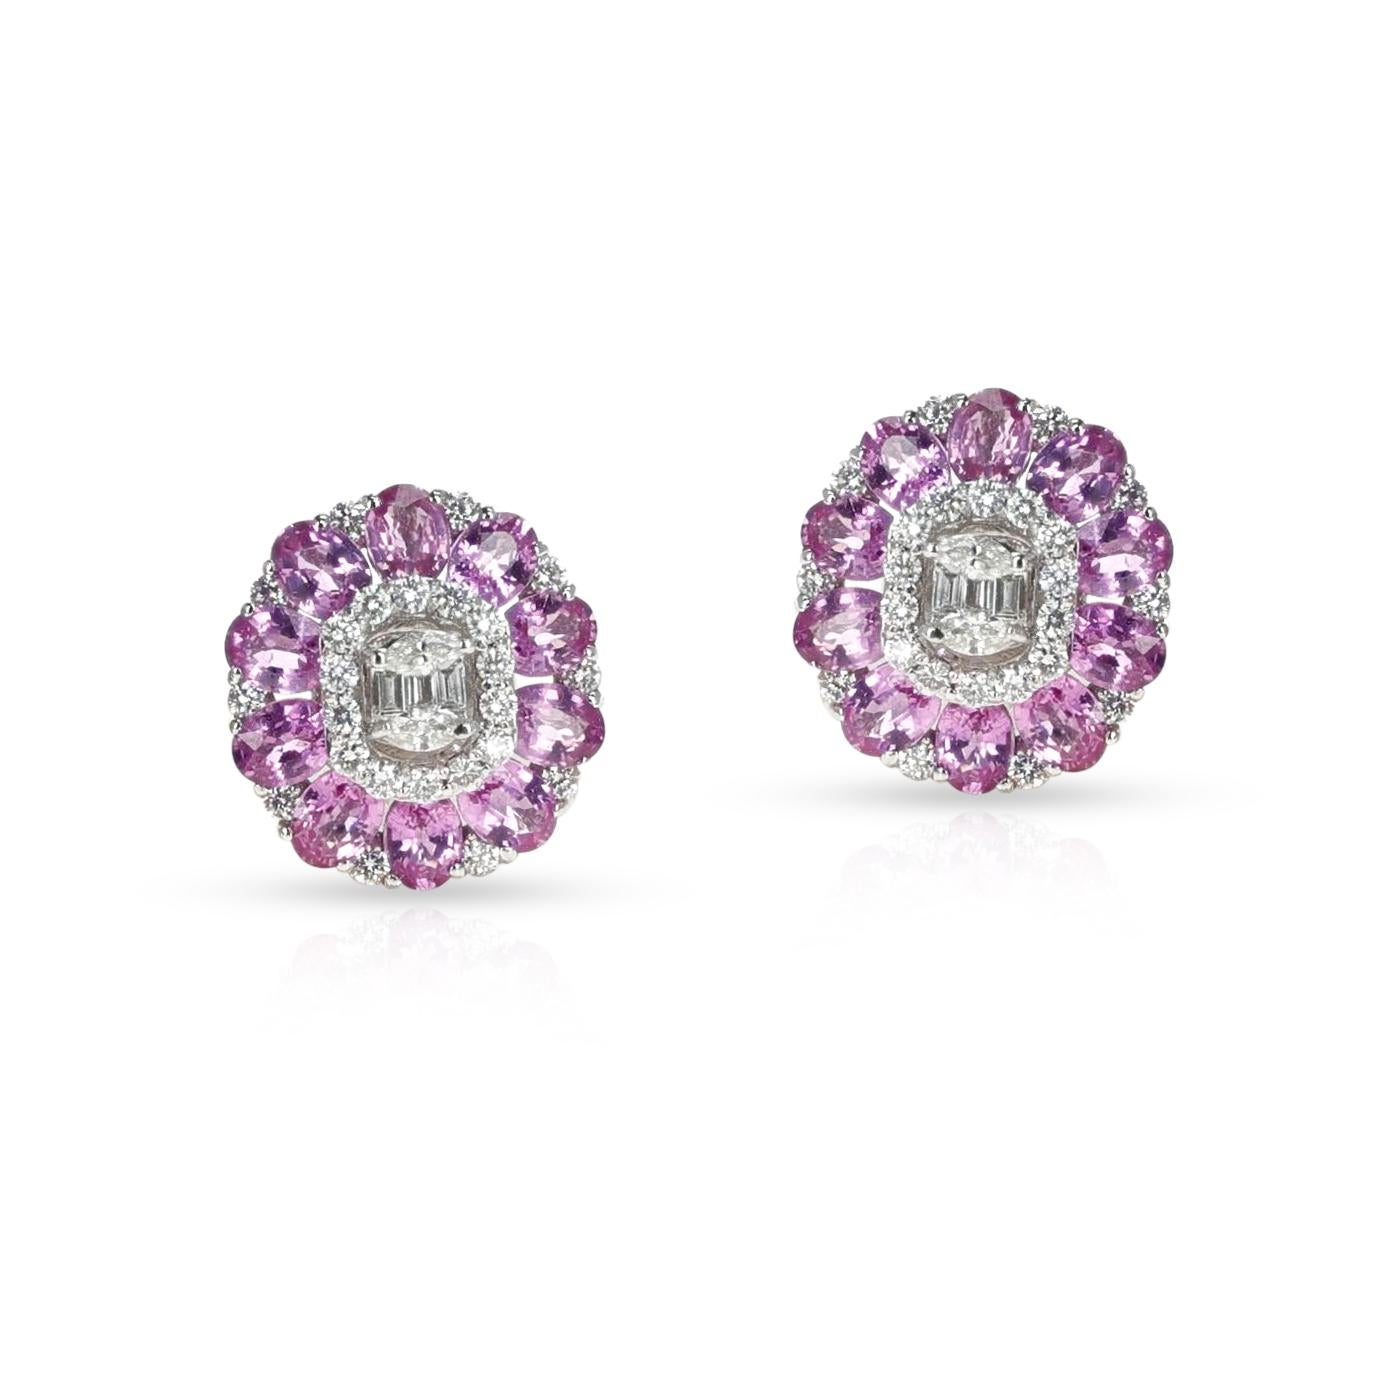 Pink Sapphire and Diamond Stud Earrings, 18k In Excellent Condition For Sale In New York, NY